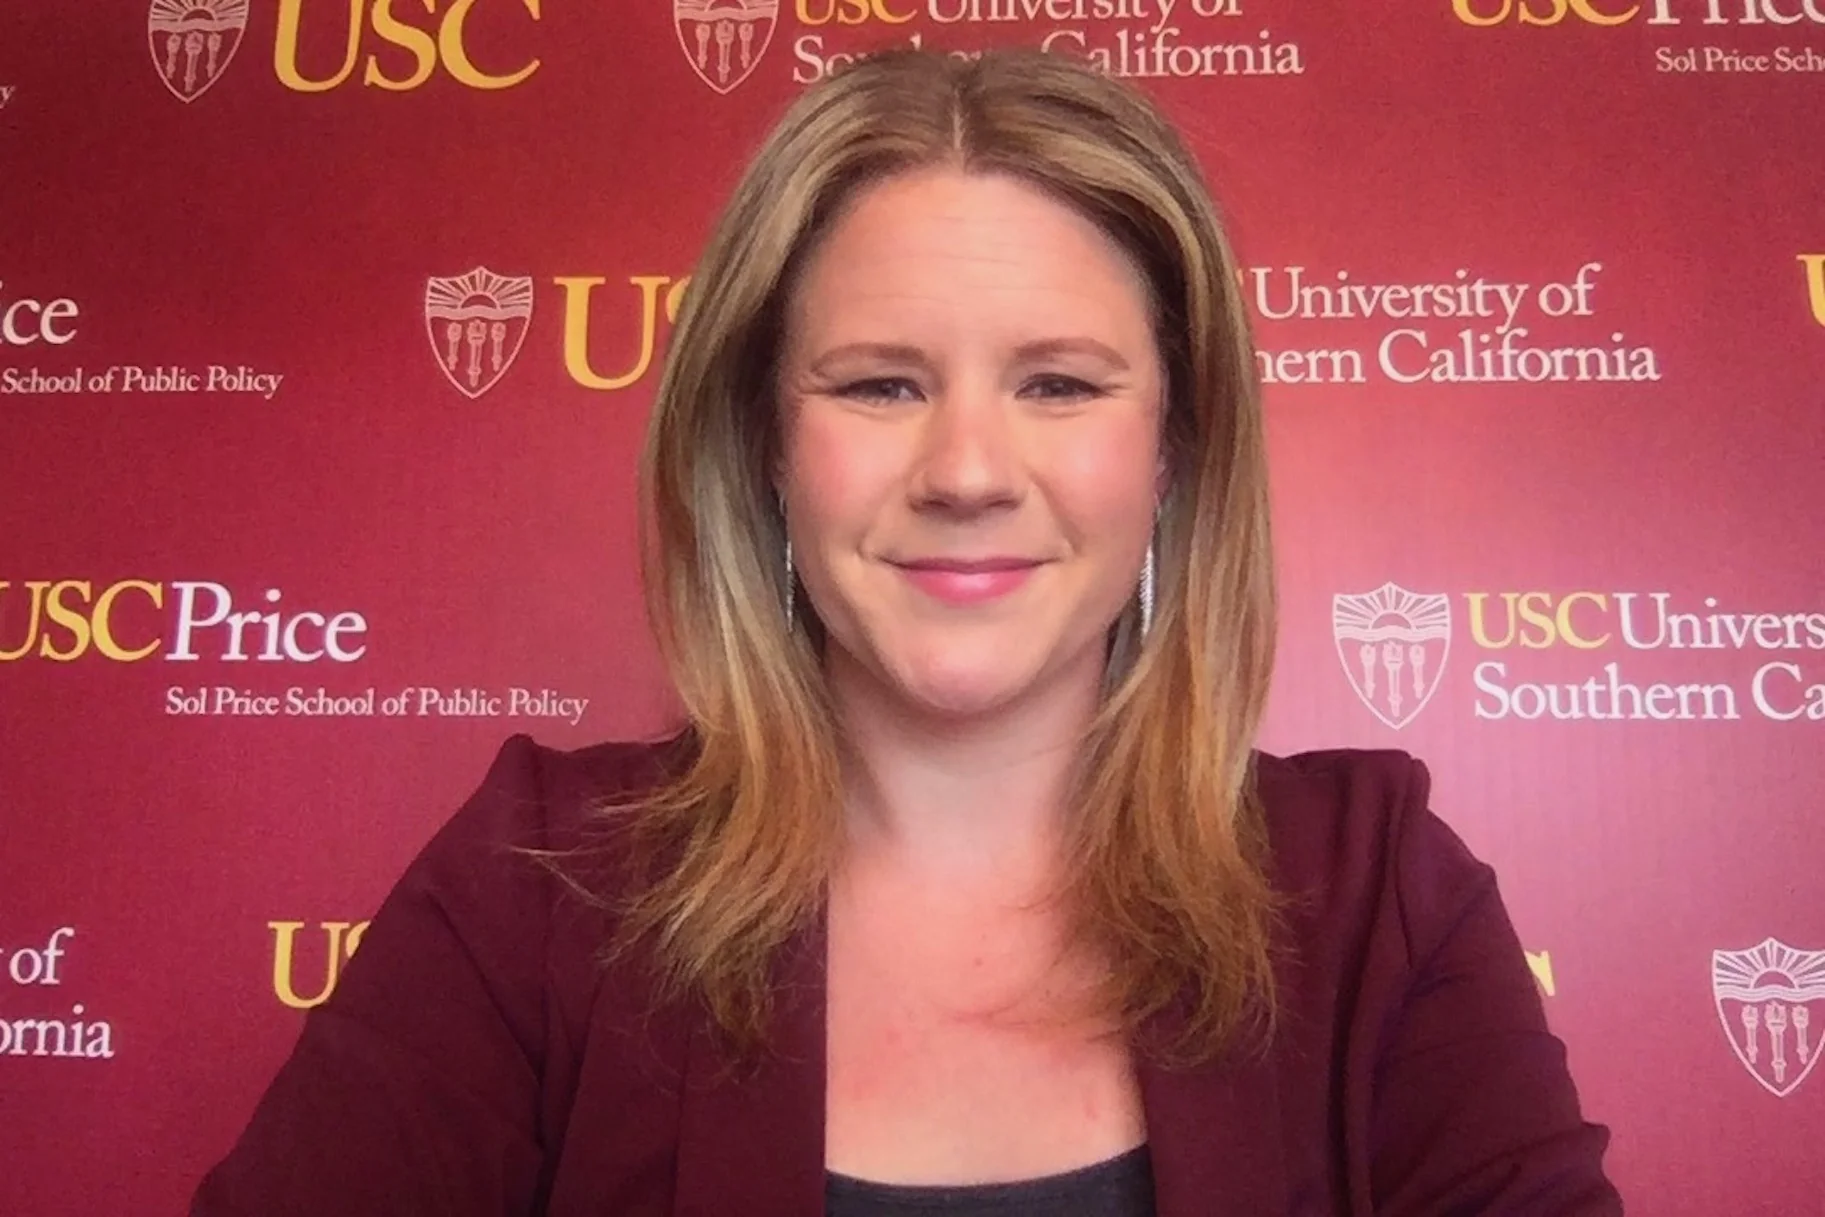 Read about: USC Price online alumna Kate Kelly smiles in red blazer in front of USC step and repeat banner.